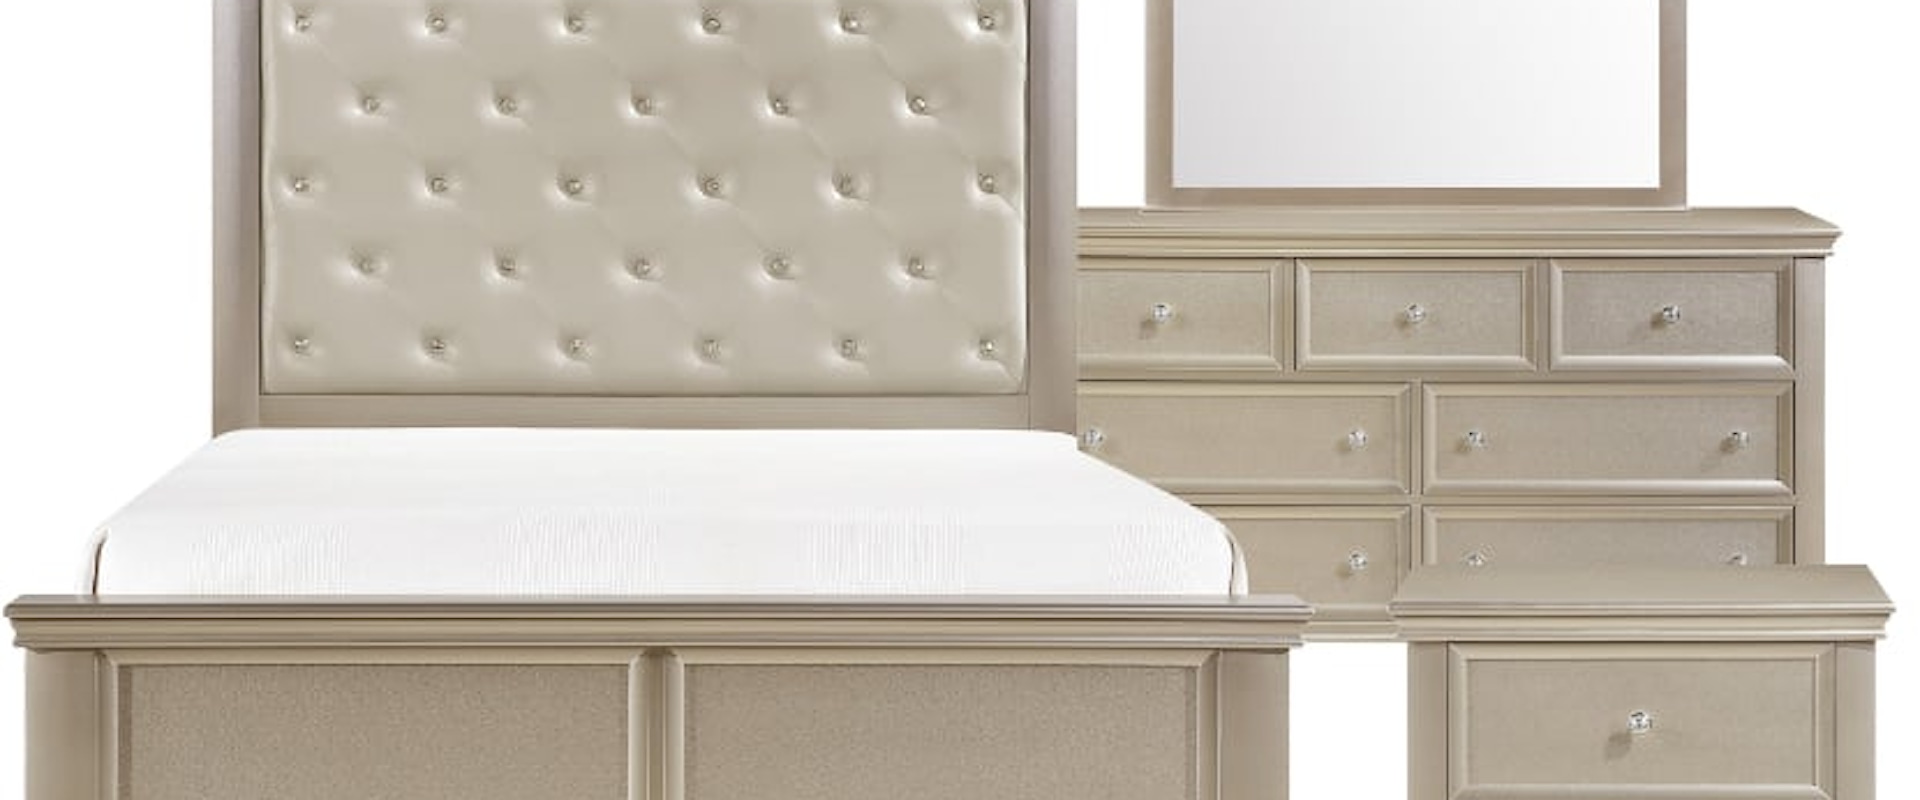 Glam 4-Piece Queen Bedroom Set with Tufted Upholstery Headboard